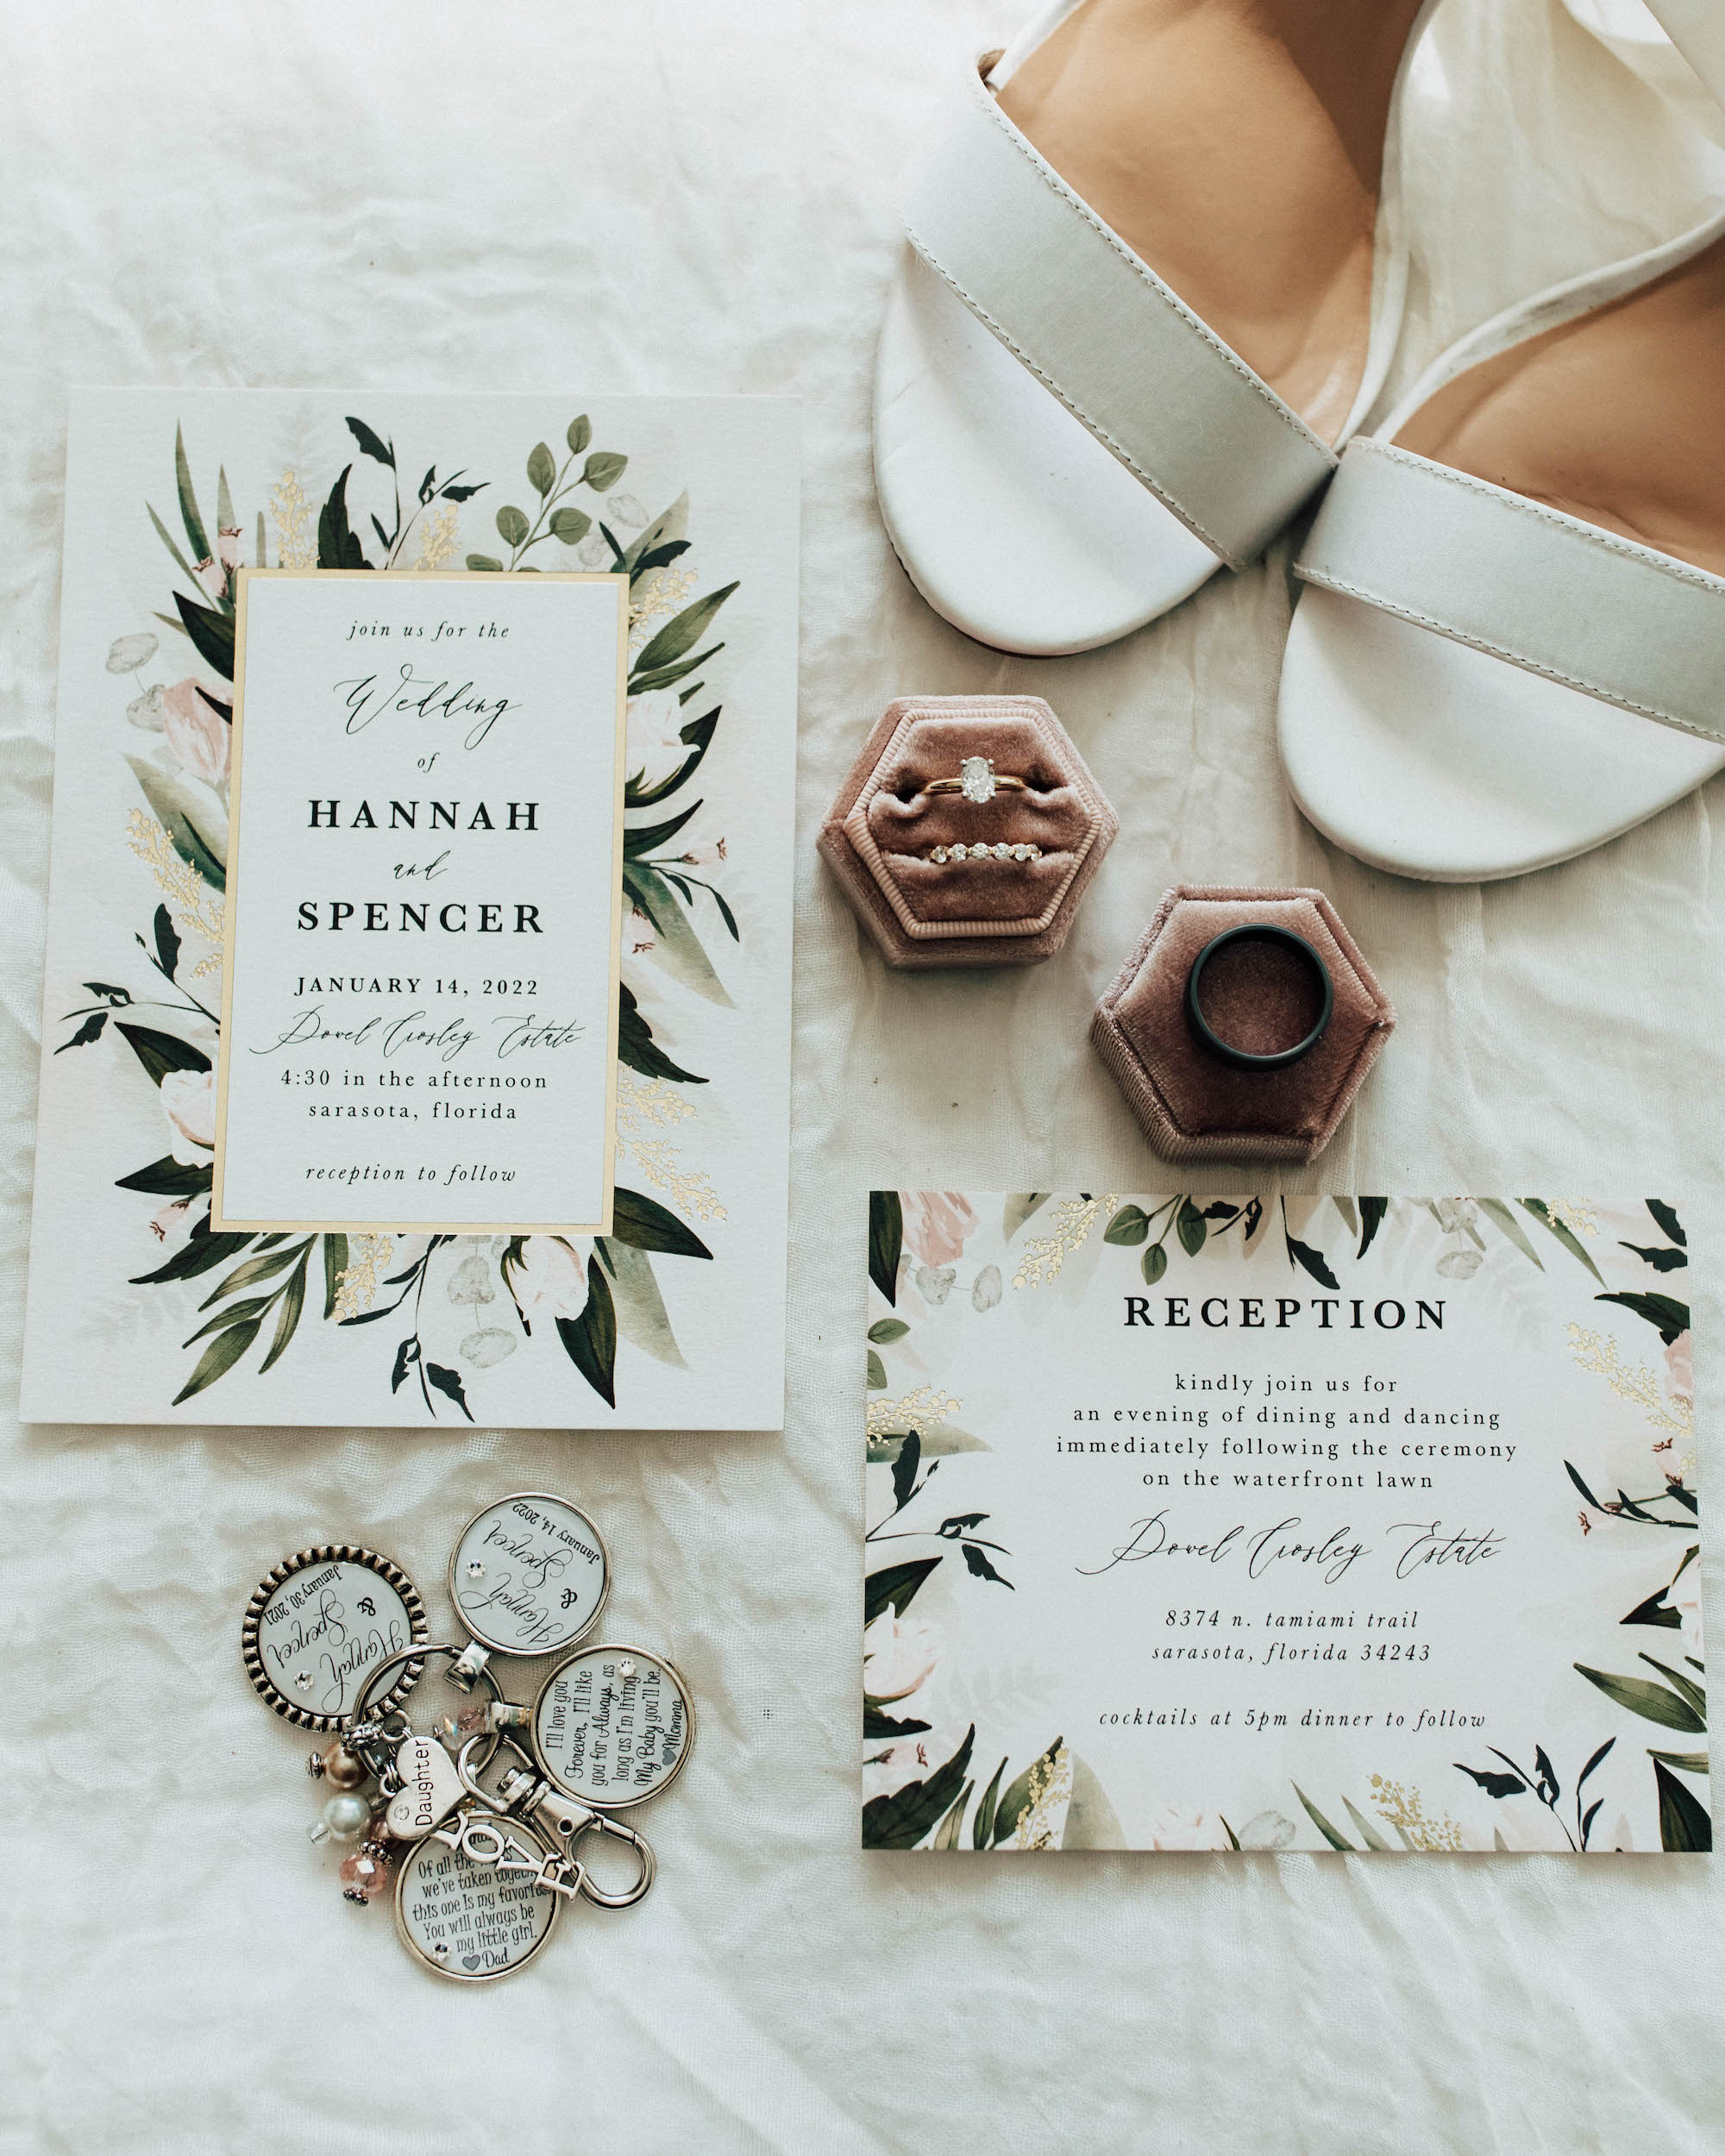 Elegant Green and Floral Invitations | Velvet Ring Box | Open Toed White Wedding Shoes